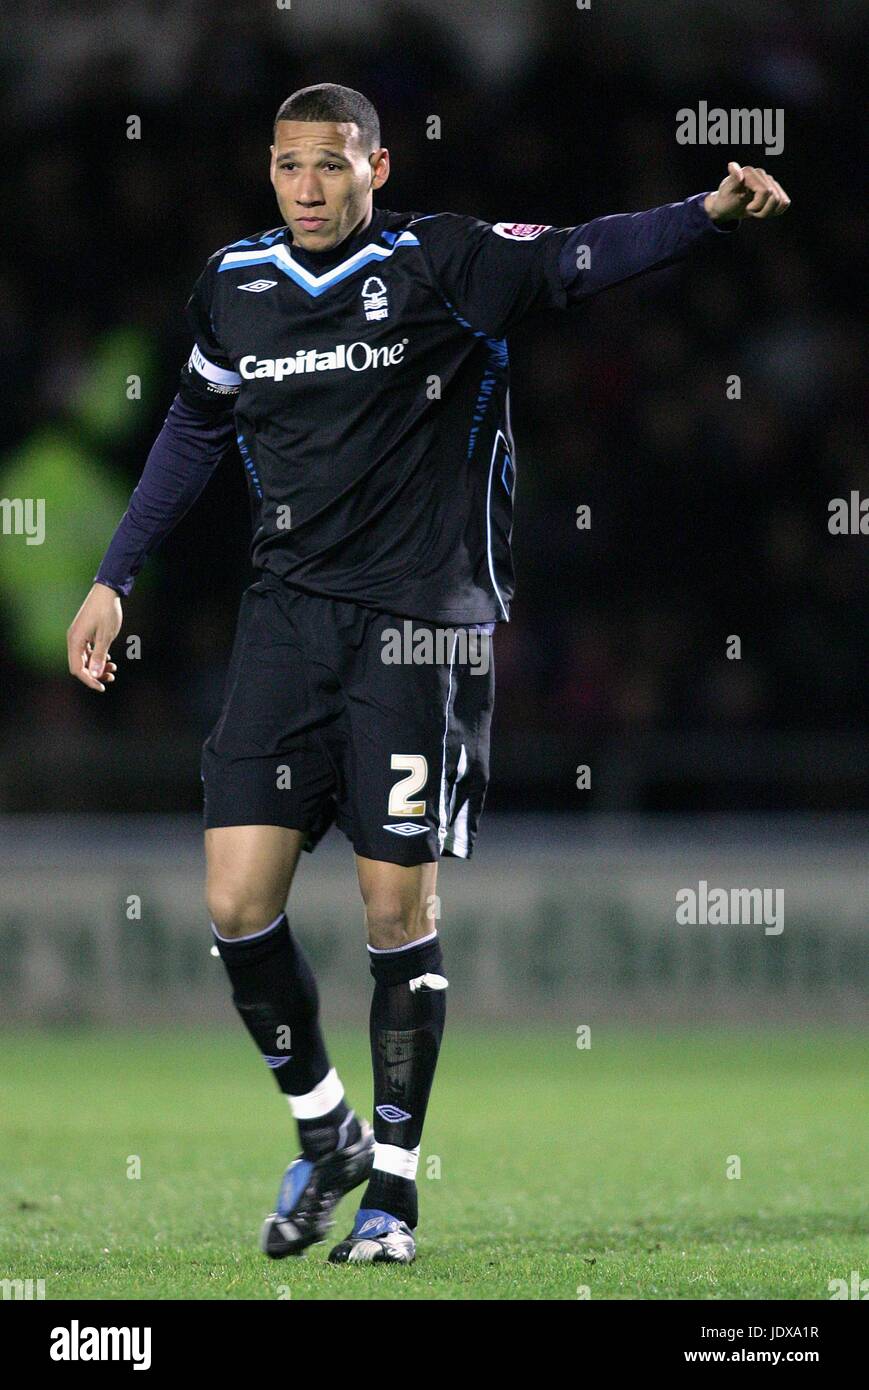 KEVIN WILSON NOTTINGHAM FOREST FC SIXFIELDS NORTHAMPTON GREAT BRITAIN 21 March 2008 Stock Photo